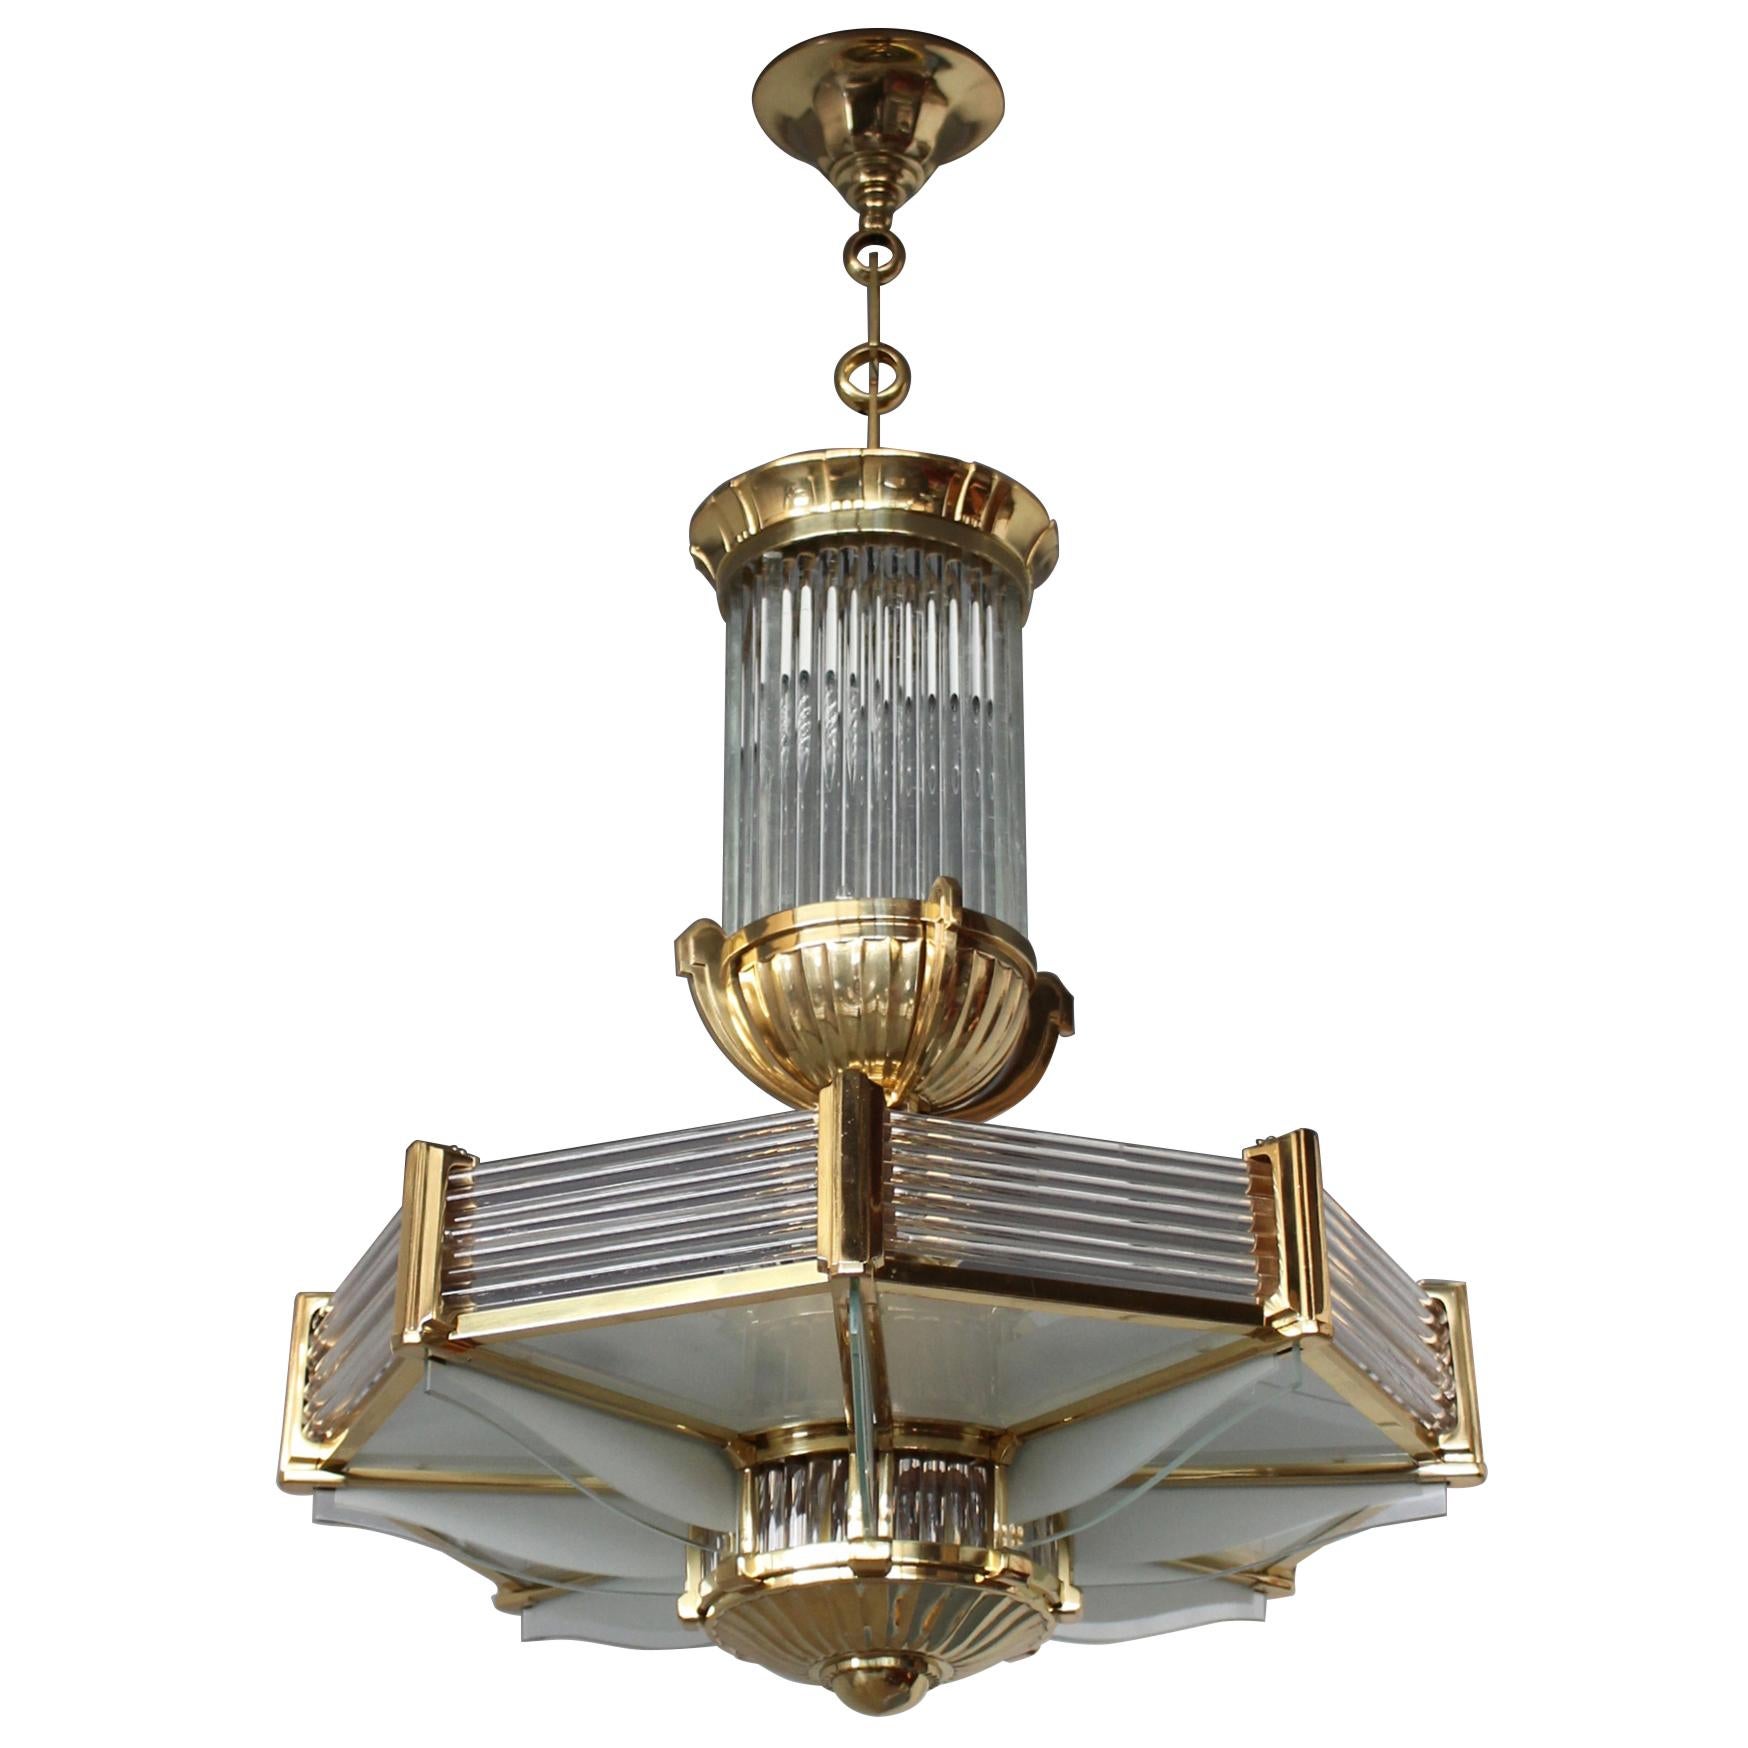 A Fine French Art Deco Octagonal Bronze and Glass Chandelier by Petitot For Sale